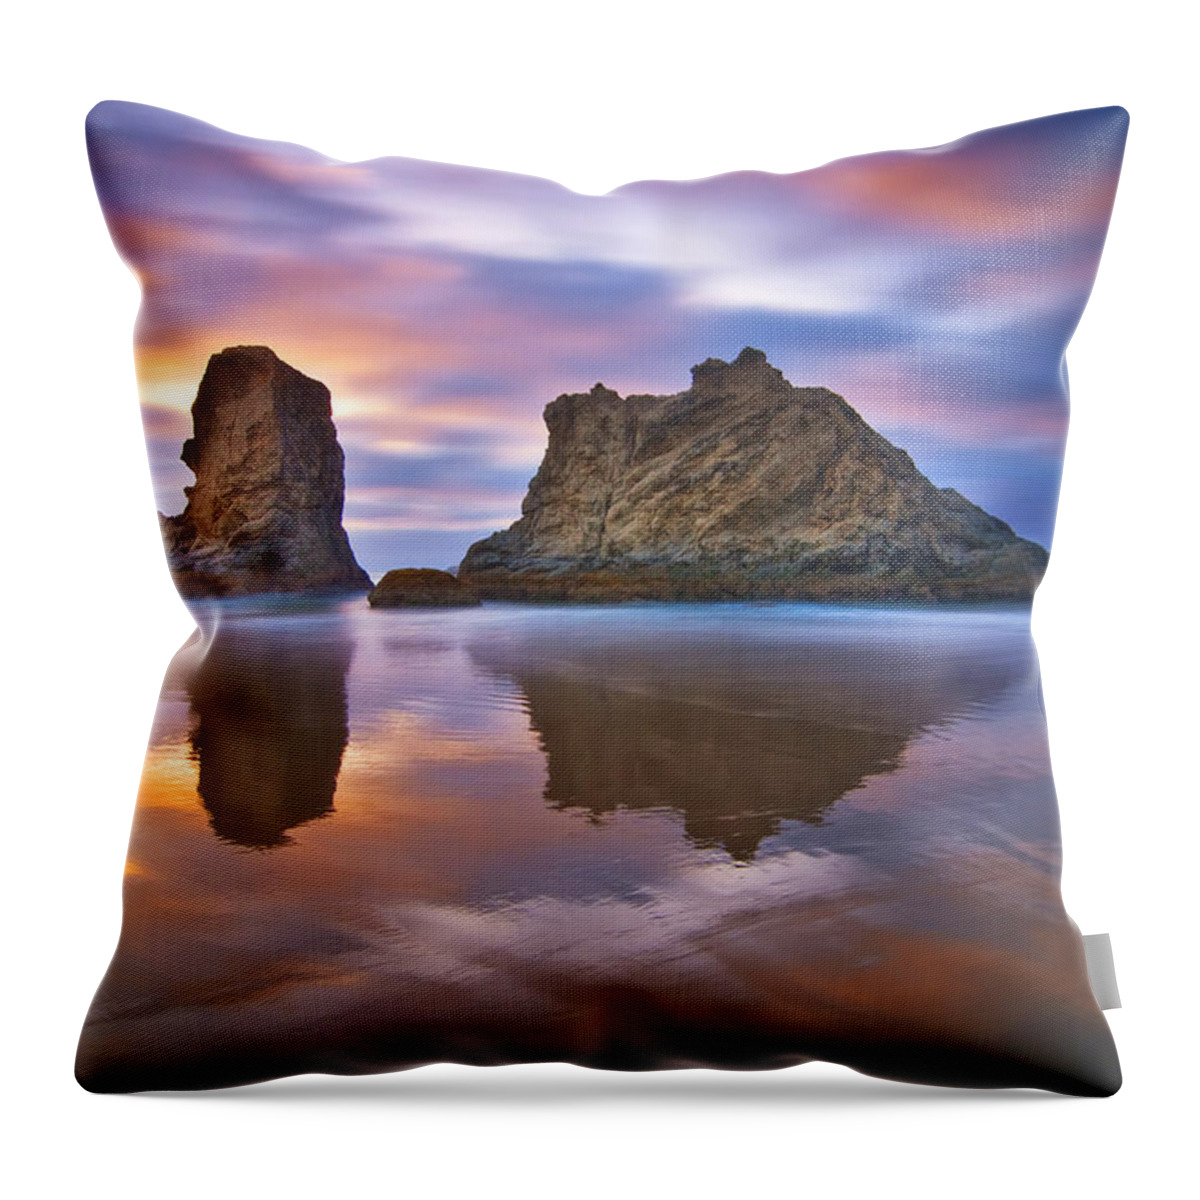 Clouds Throw Pillow featuring the photograph Coastal Cloud Dance by Darren White